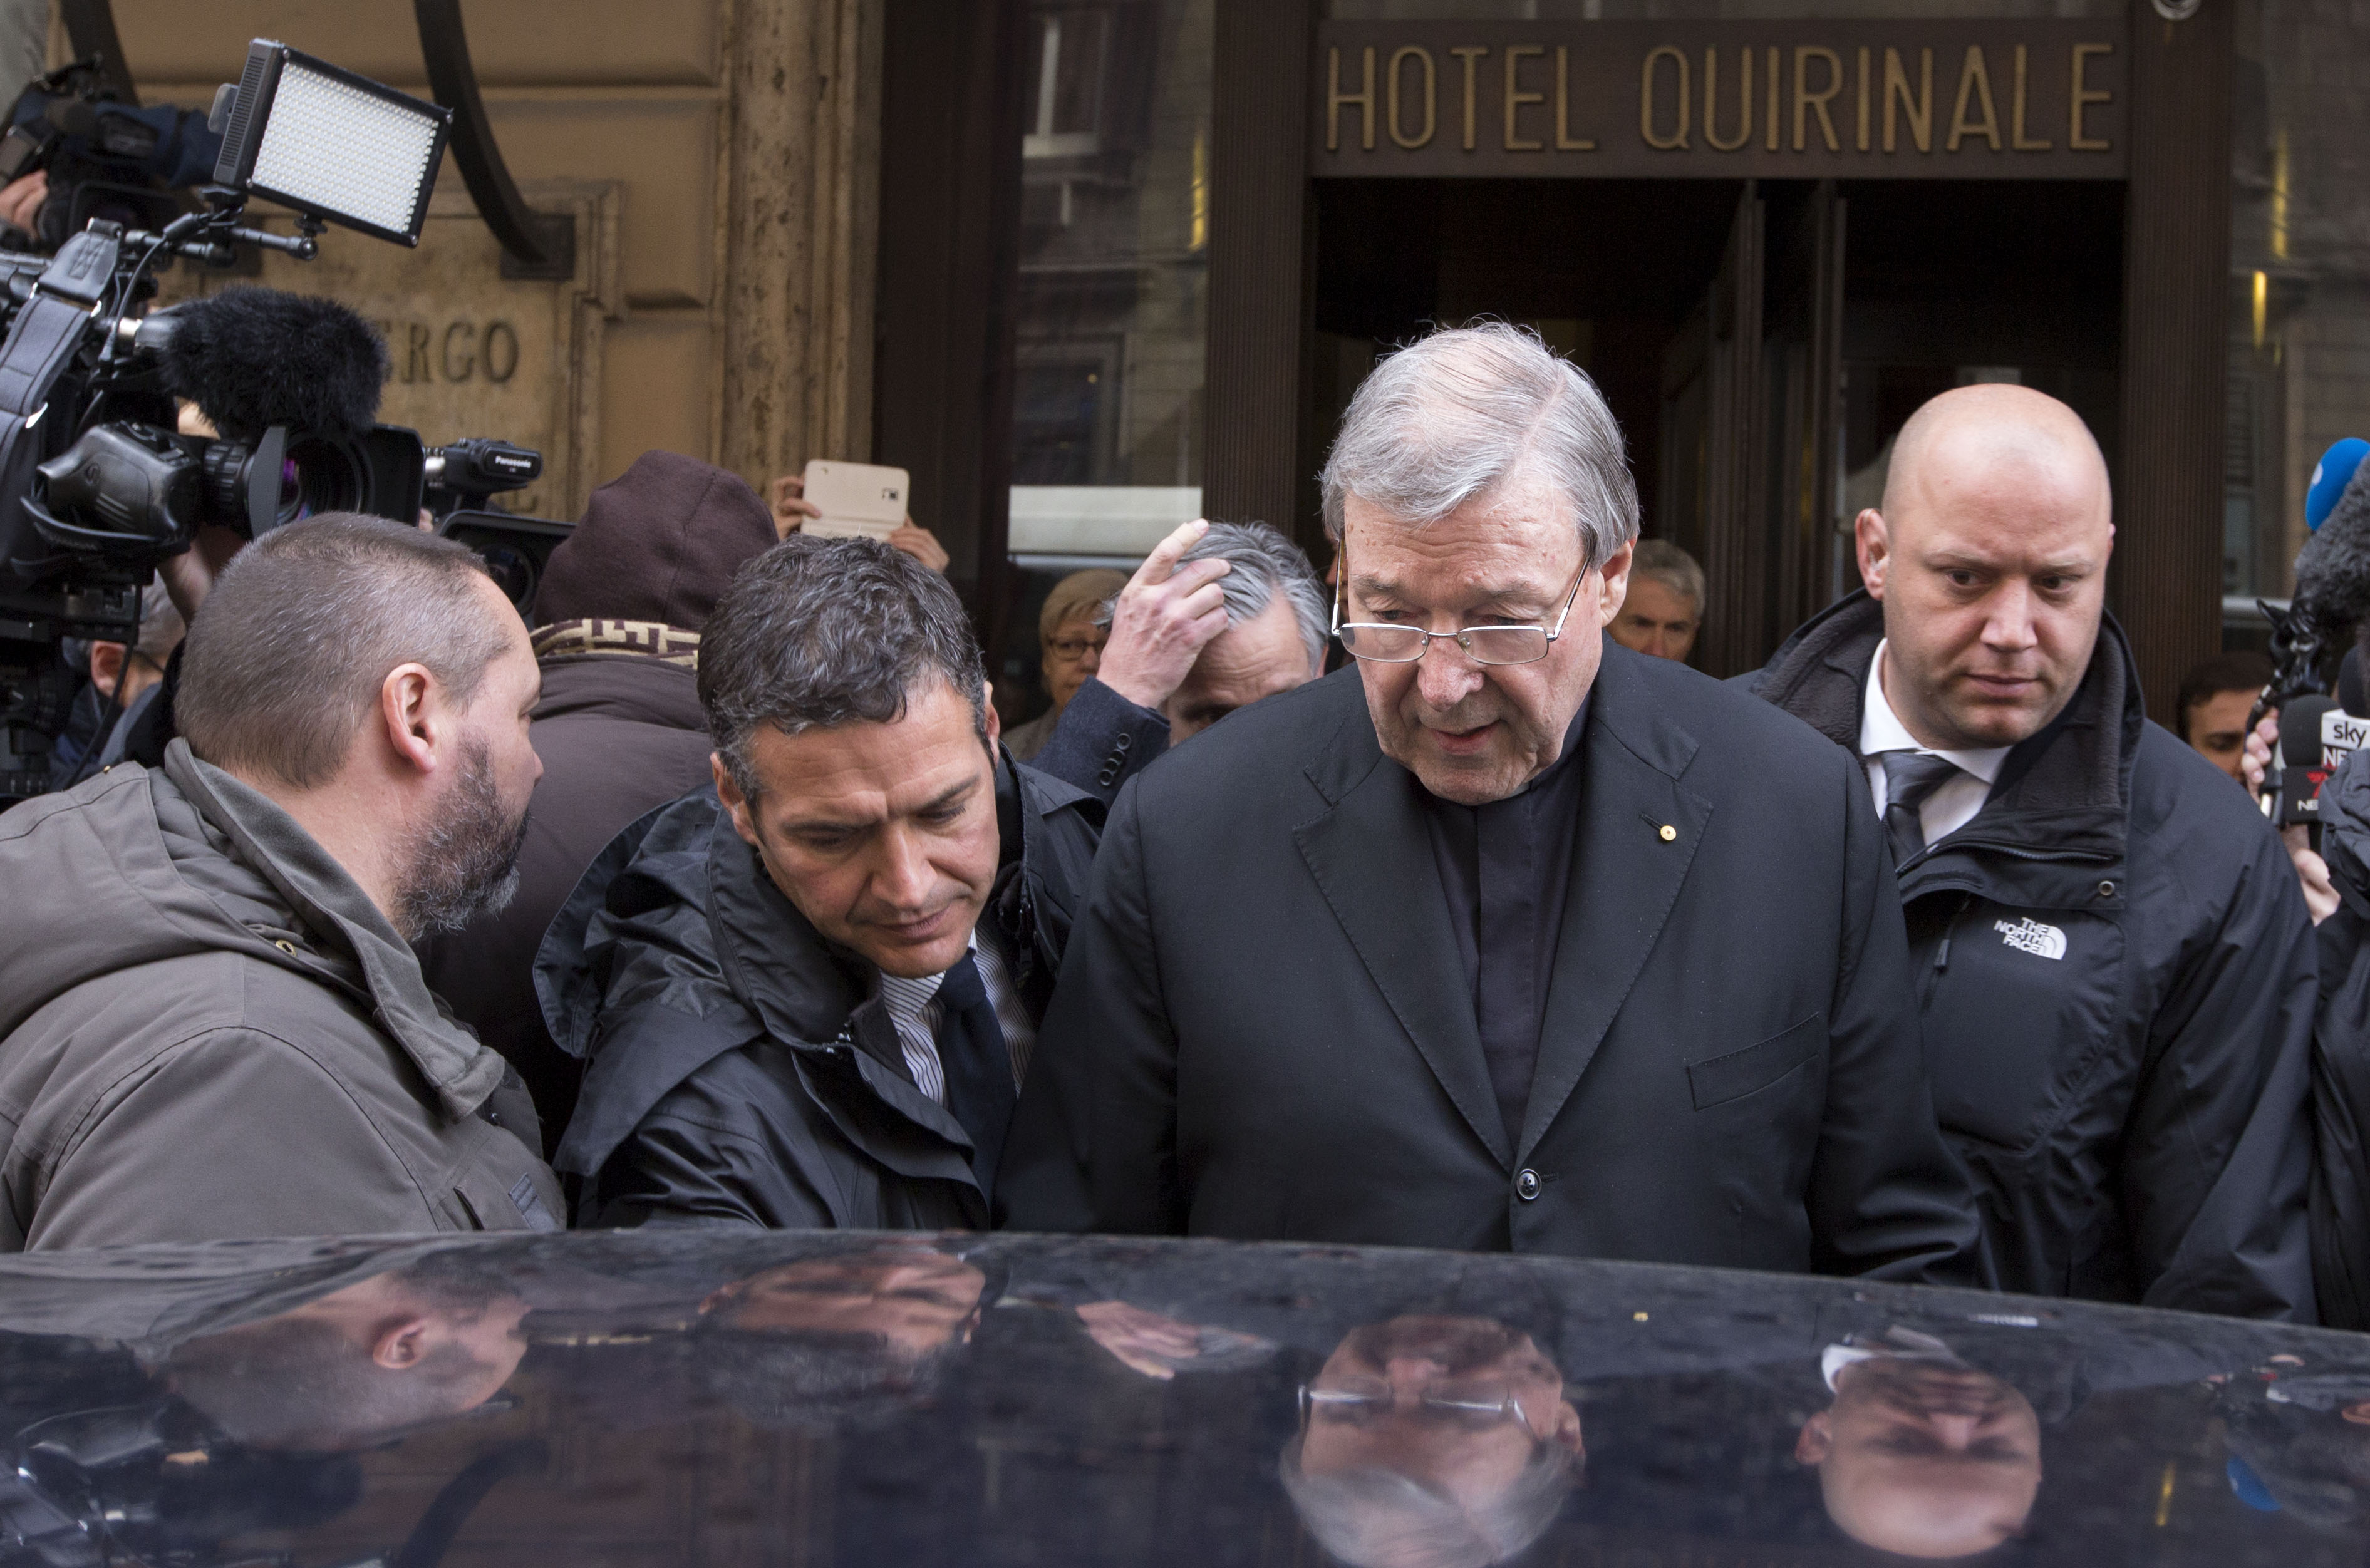 Australian cardinal George Pell leaves the Quirinale hotel after meeting members of an Australian group of relatives and victims of priestly sex abuses, in Rome, Thursday, March 3, 2016. (Riccardo De Luca—AP)